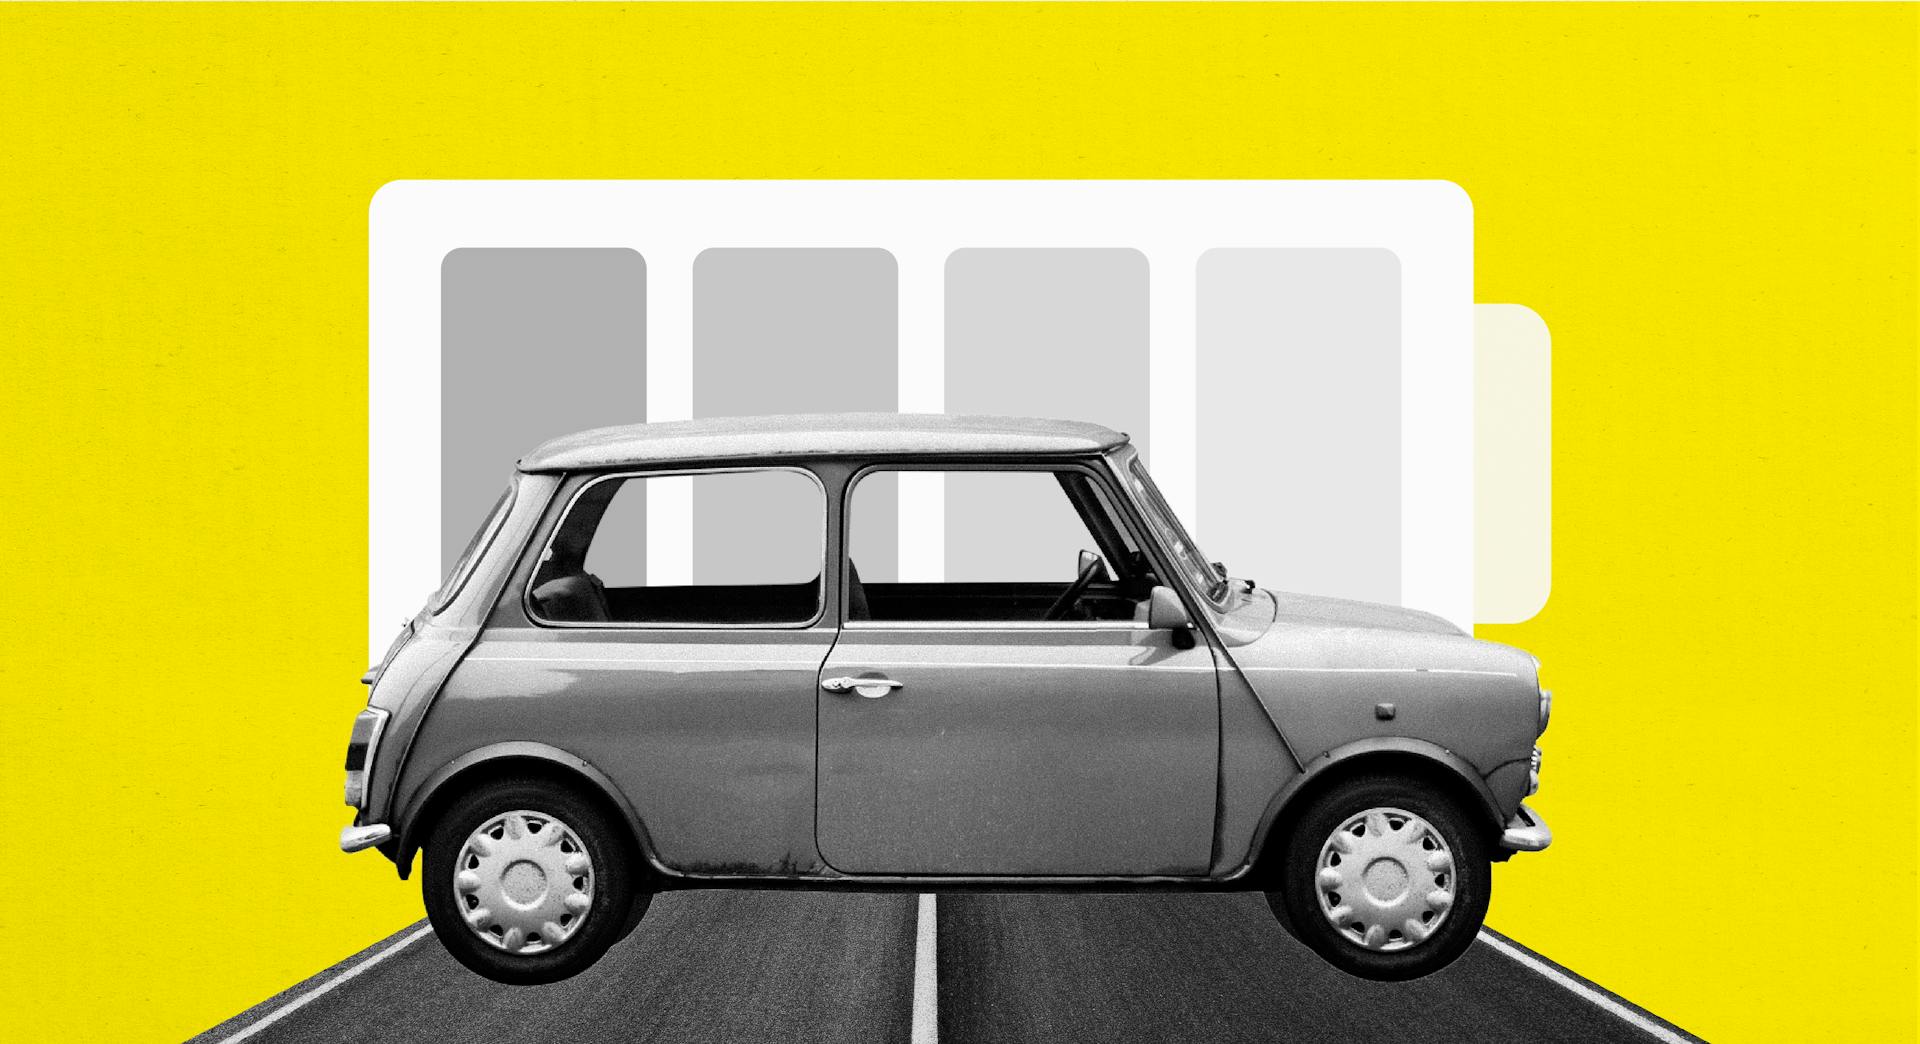 An illustration of a mini cooper car on a yellow background with a battery symbol. 